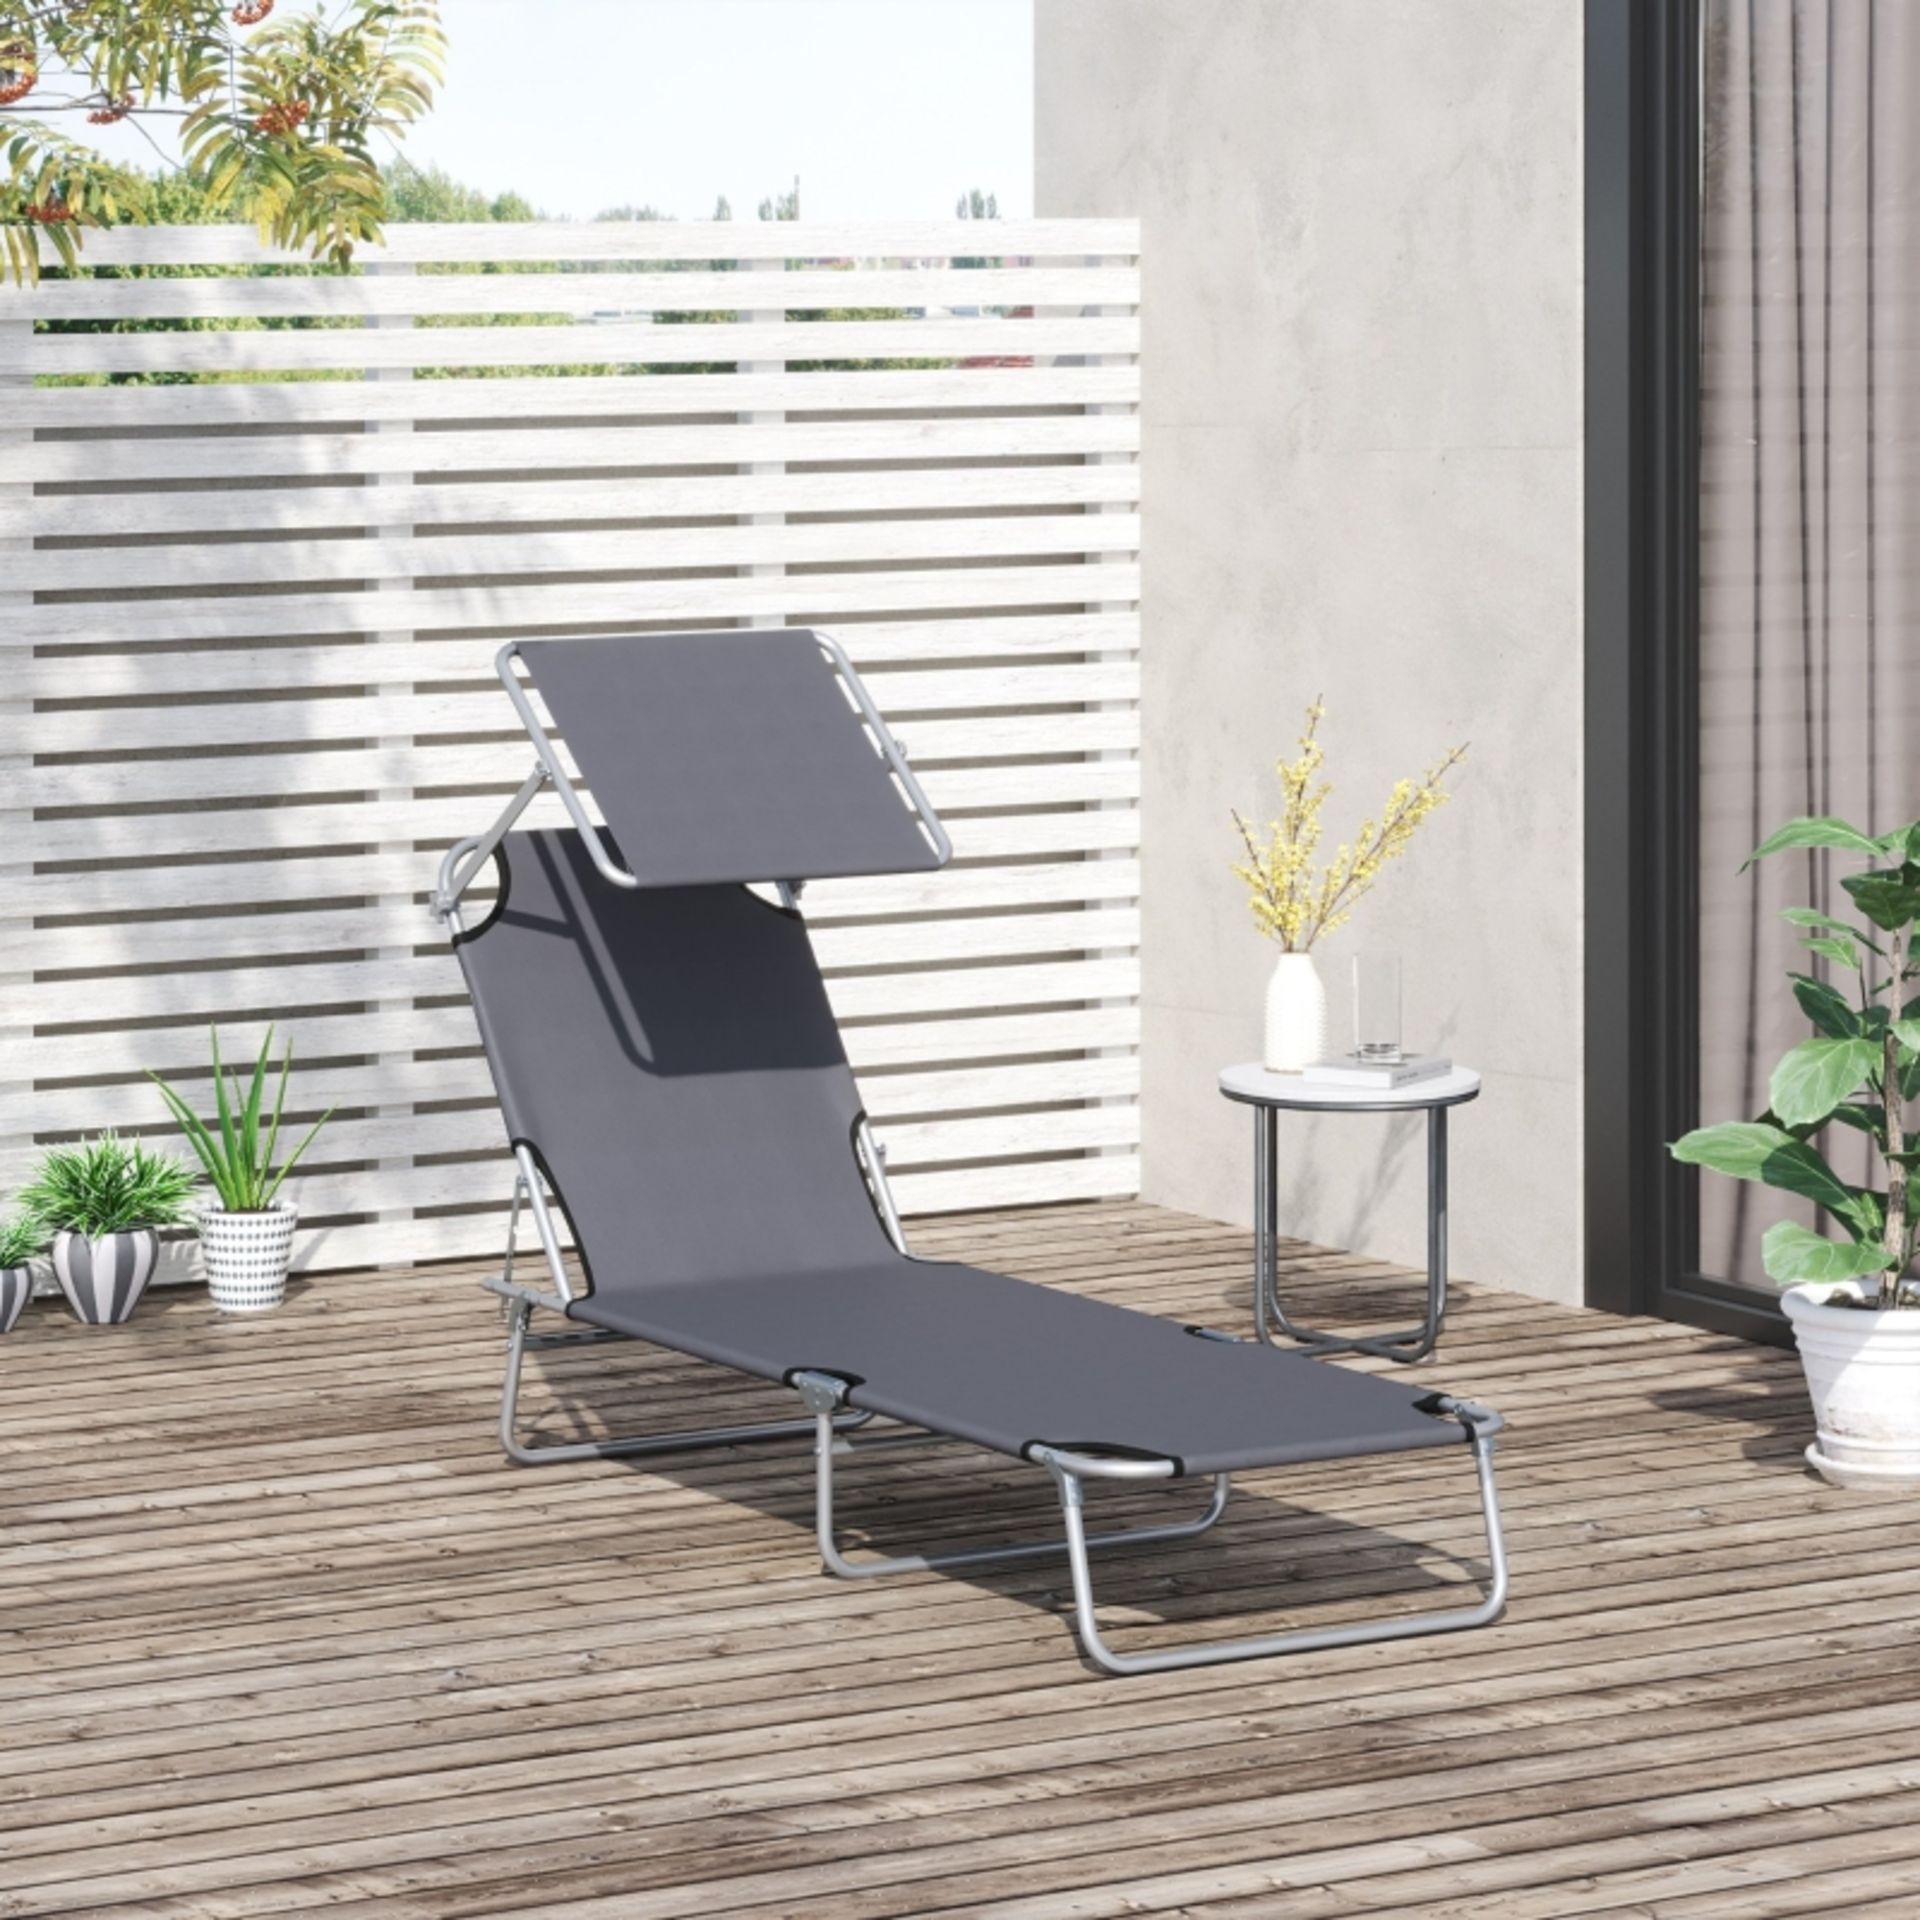 RPP £54.99 -Outsunny Reclining Chair Sun Lounger Folding Lounger Seat with Sun Shade Awning Beach